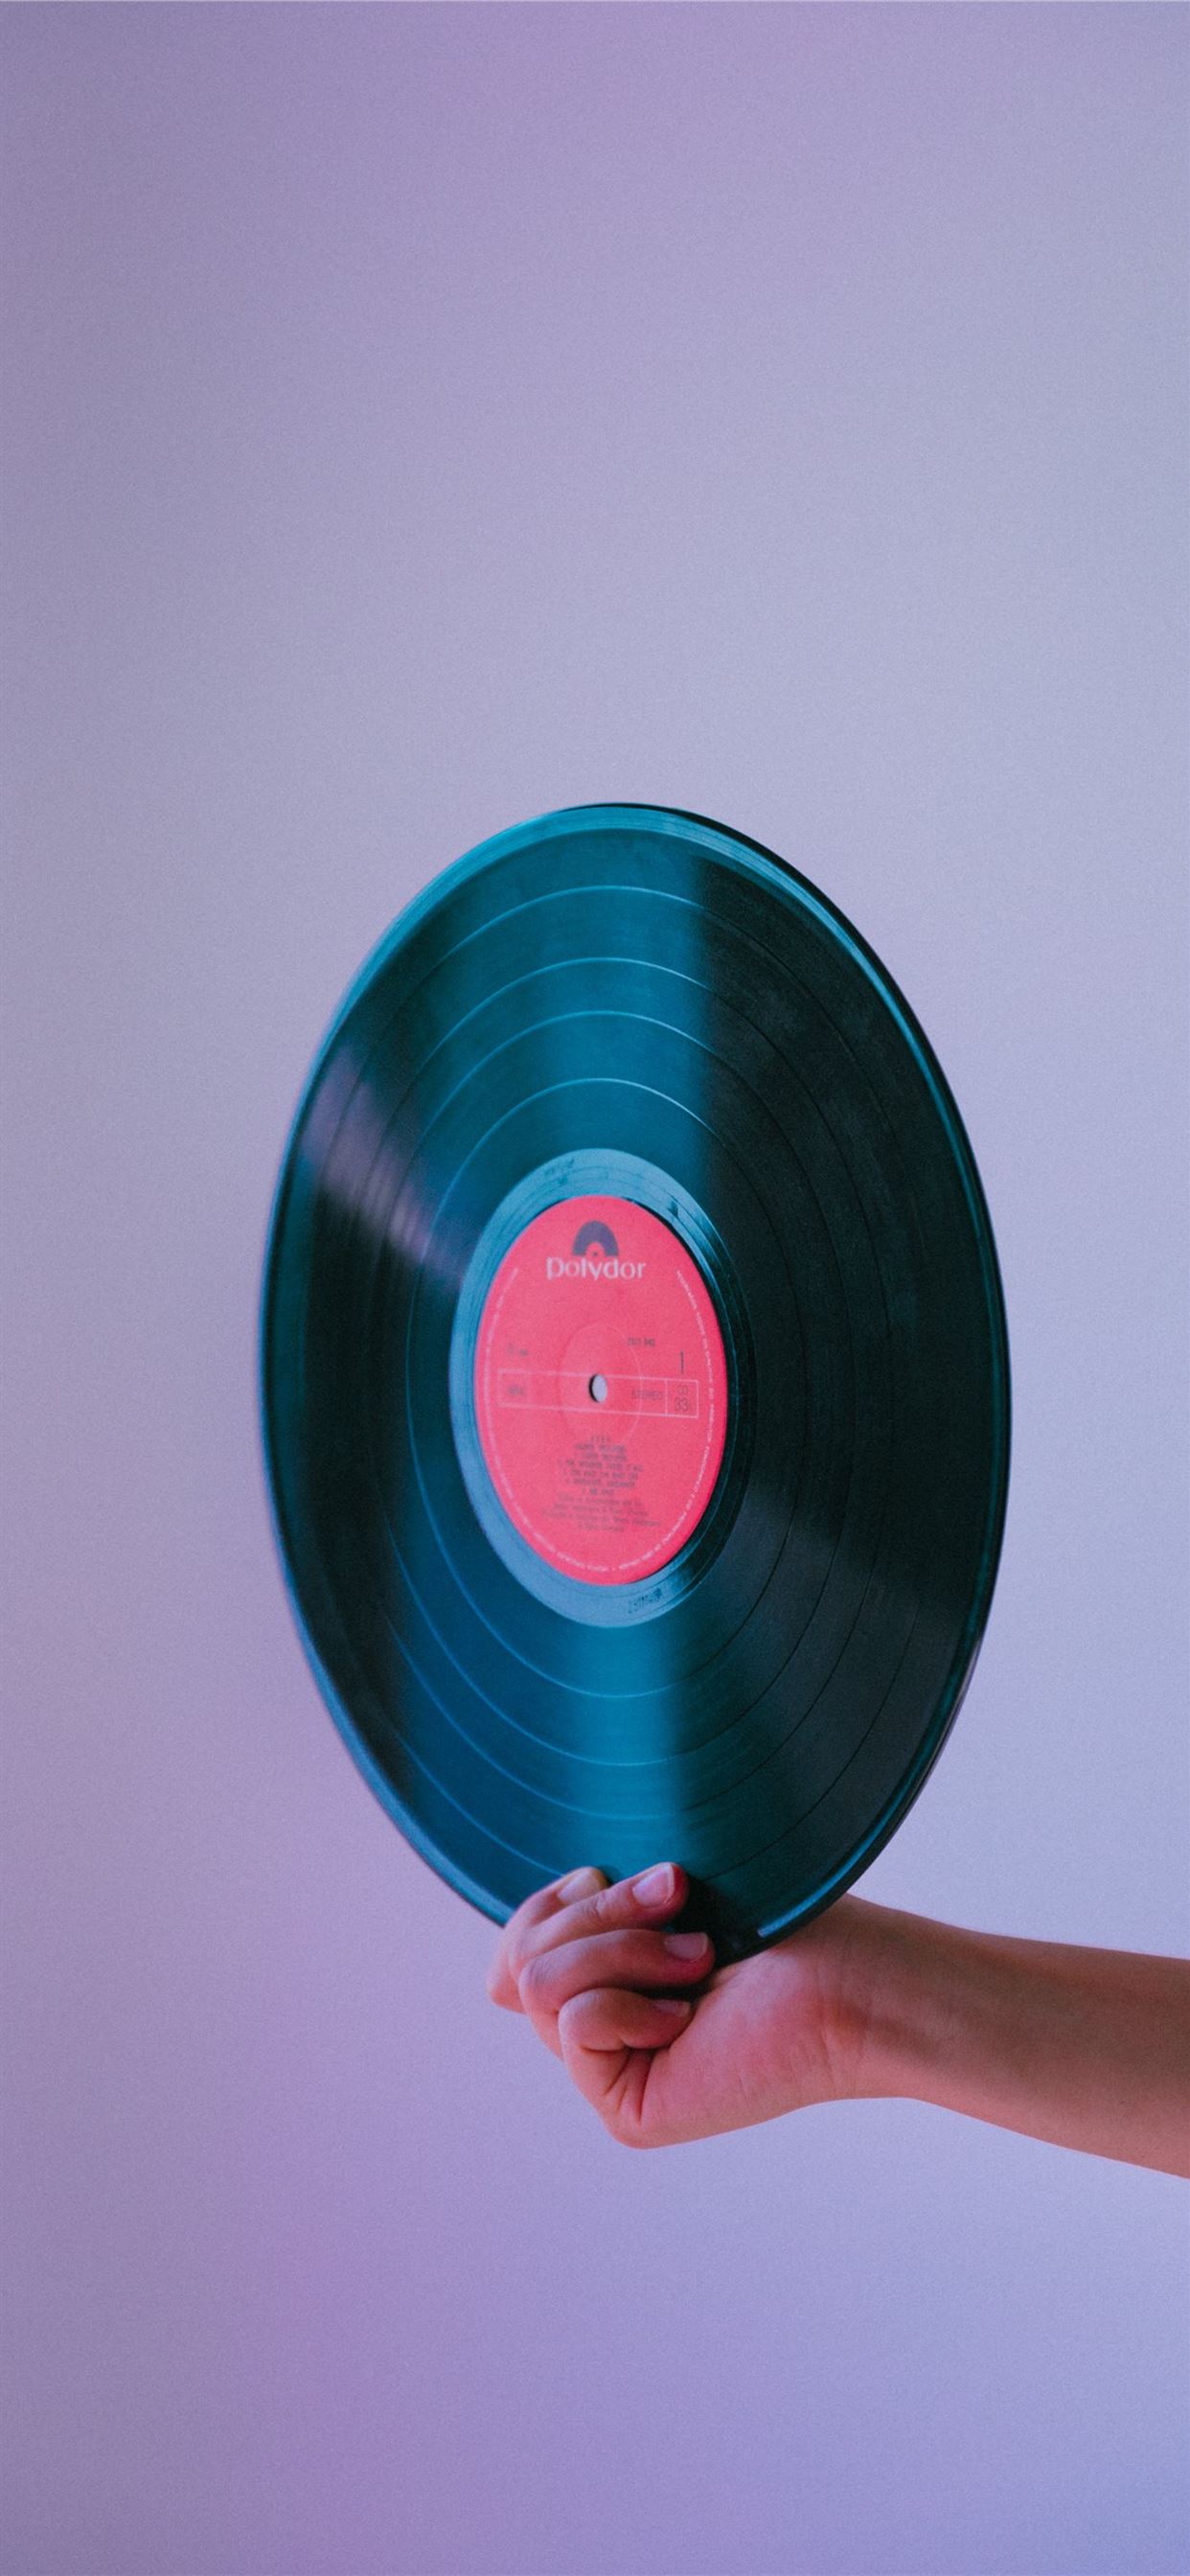 person holding vinyl record iPhone 11 Wallpaper Free Download